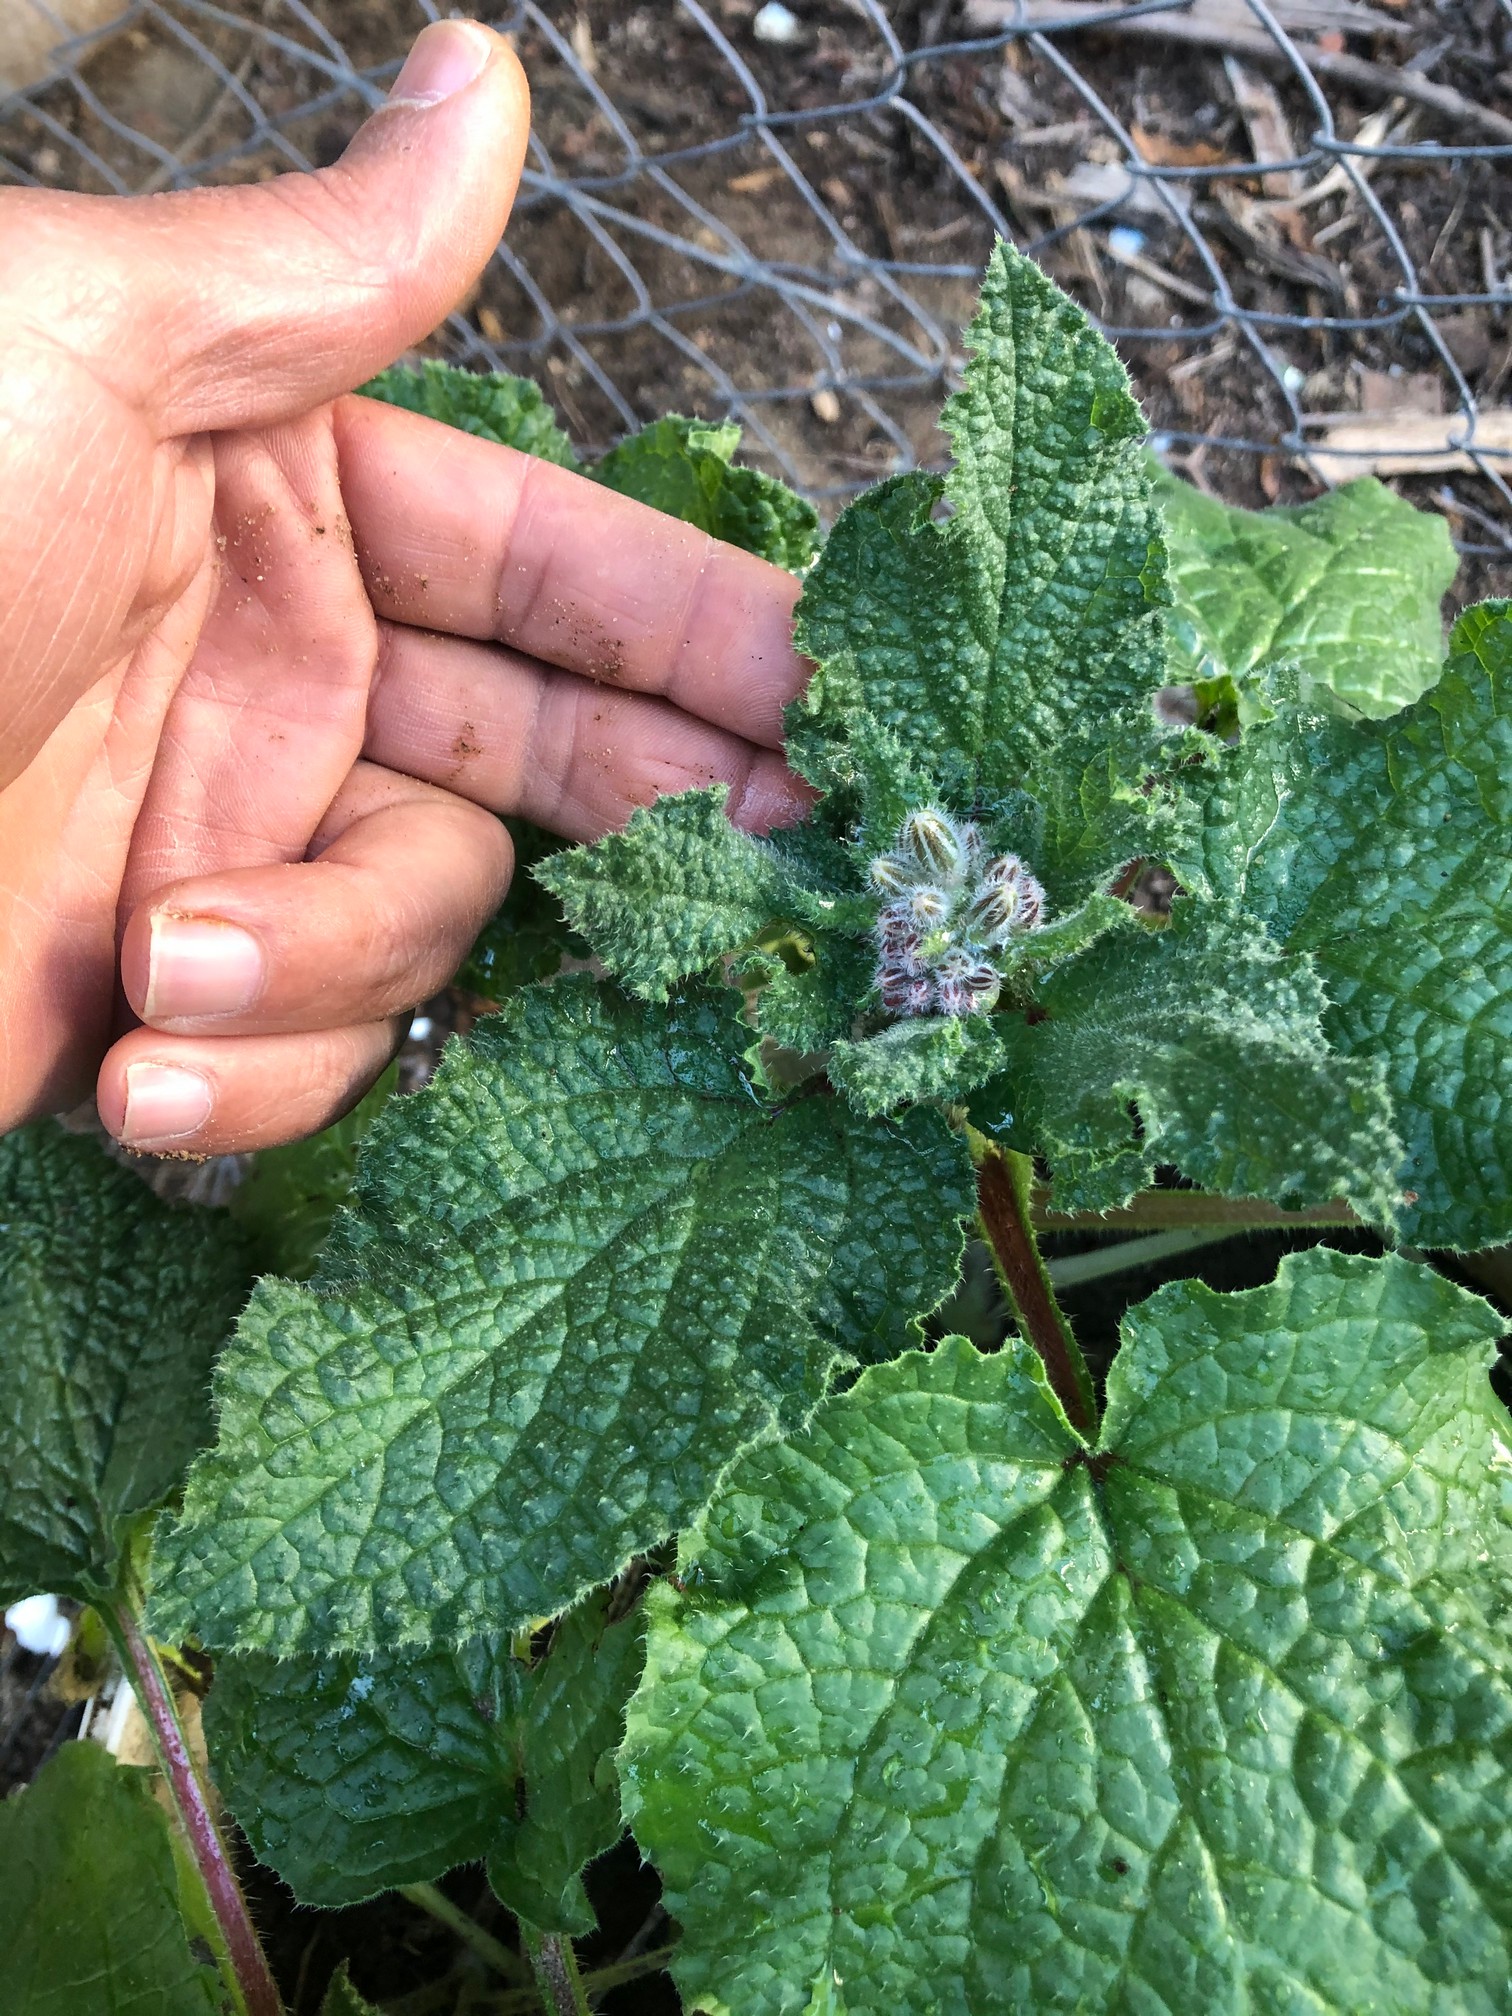 The leaves and stems of the borage plant are covered with small bristle-like hairs. The leaves are ovate in shape and range in length from 2 to 6 inches in length, with larger leaves towards the bottom of the plants.